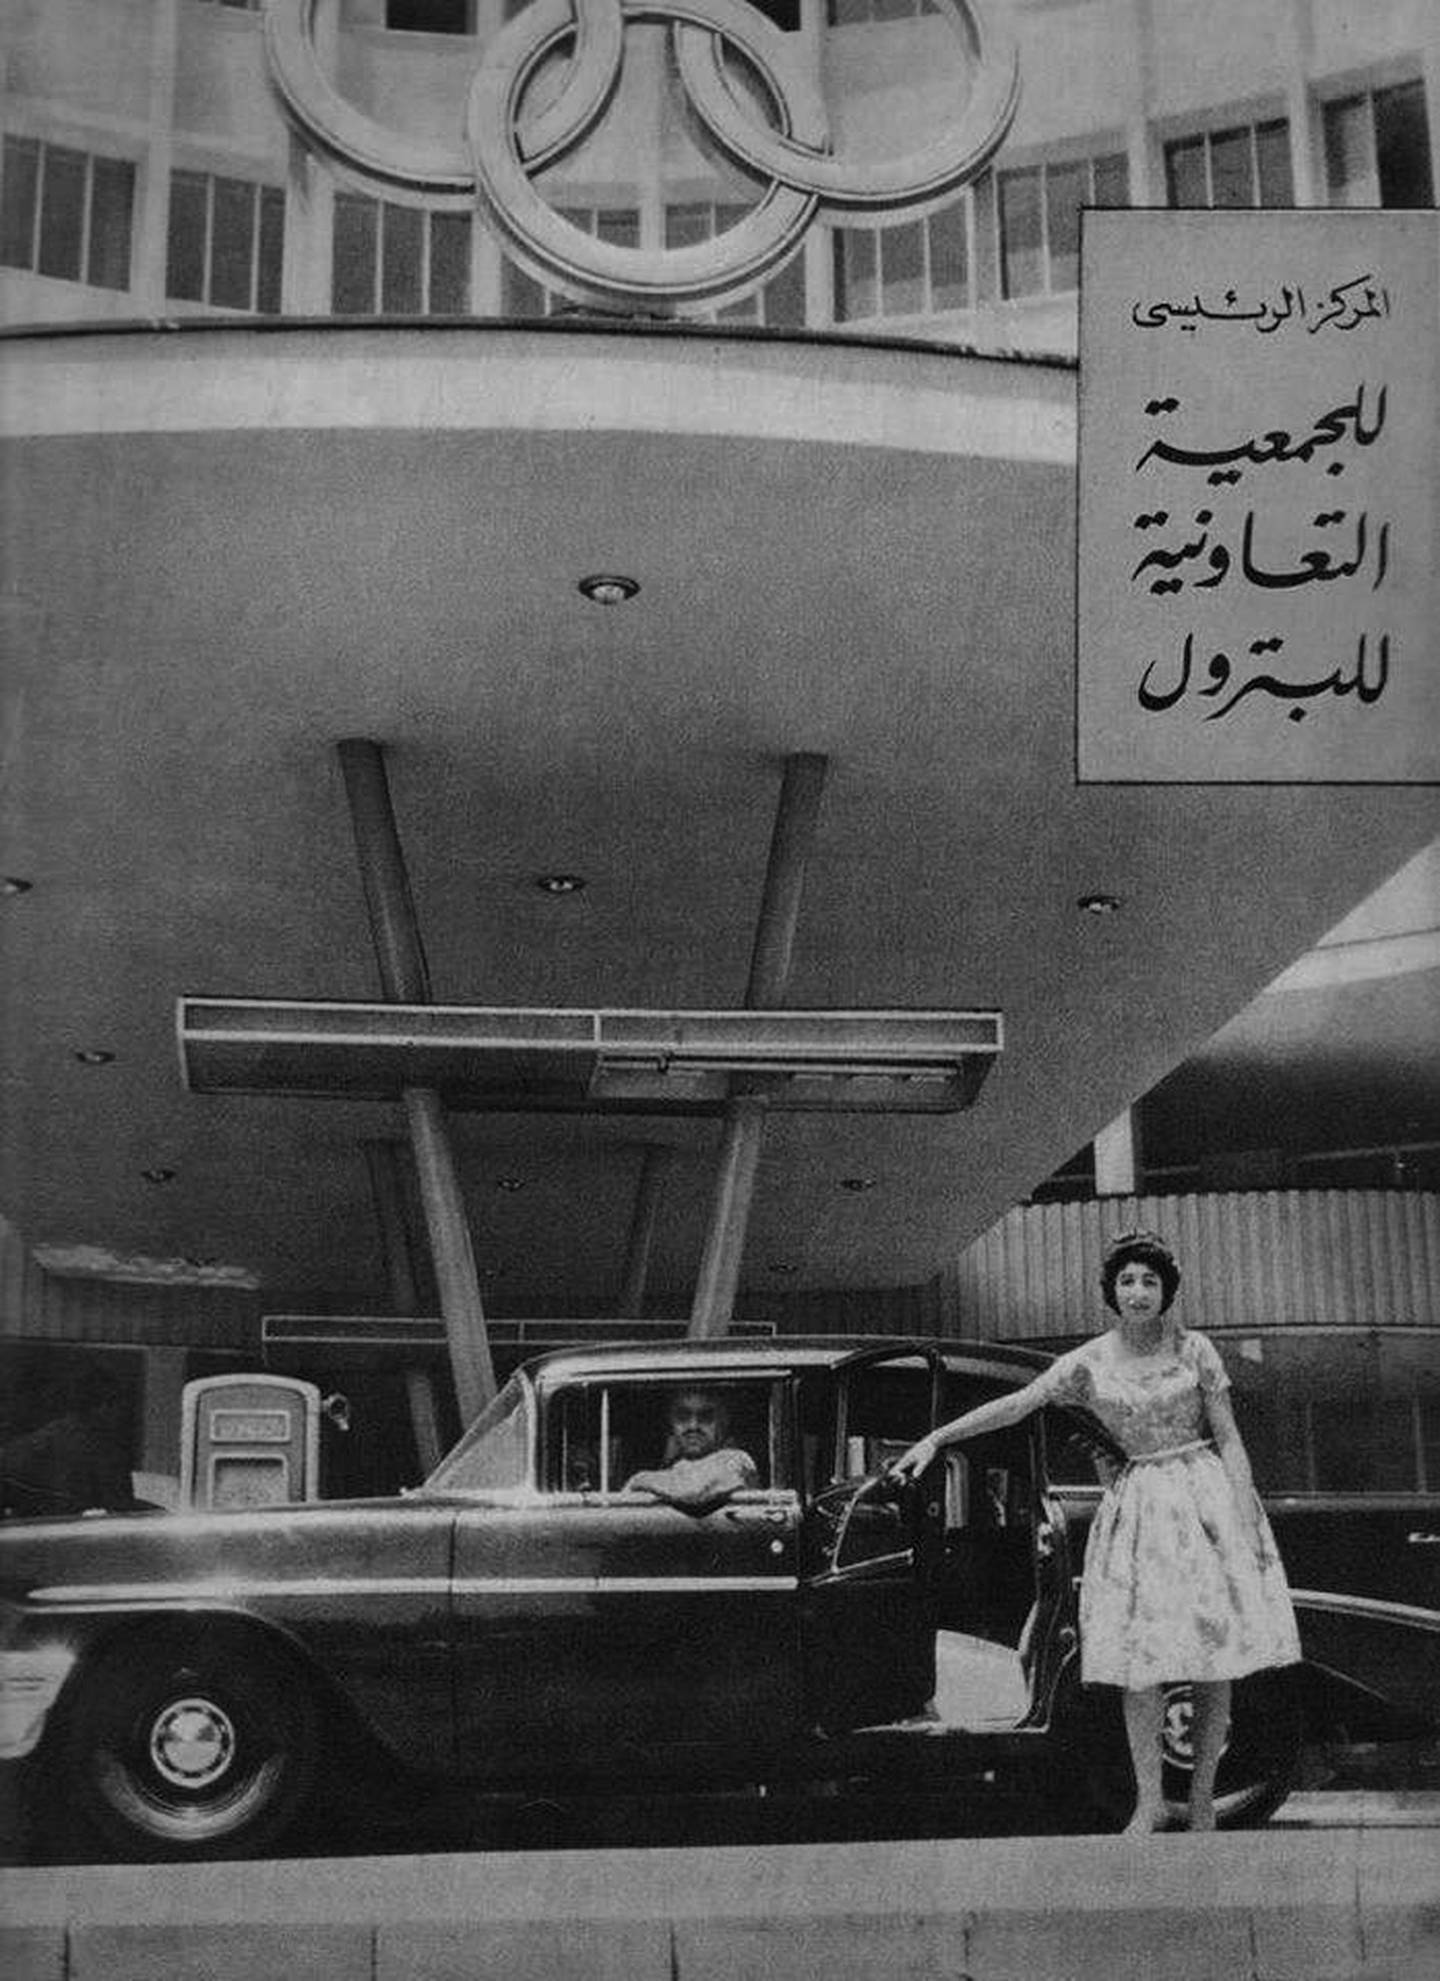 The Petroleum Cooperative Society, by architect Muhammad Ramzy Omar, in 1957. Photo Al Musawwar